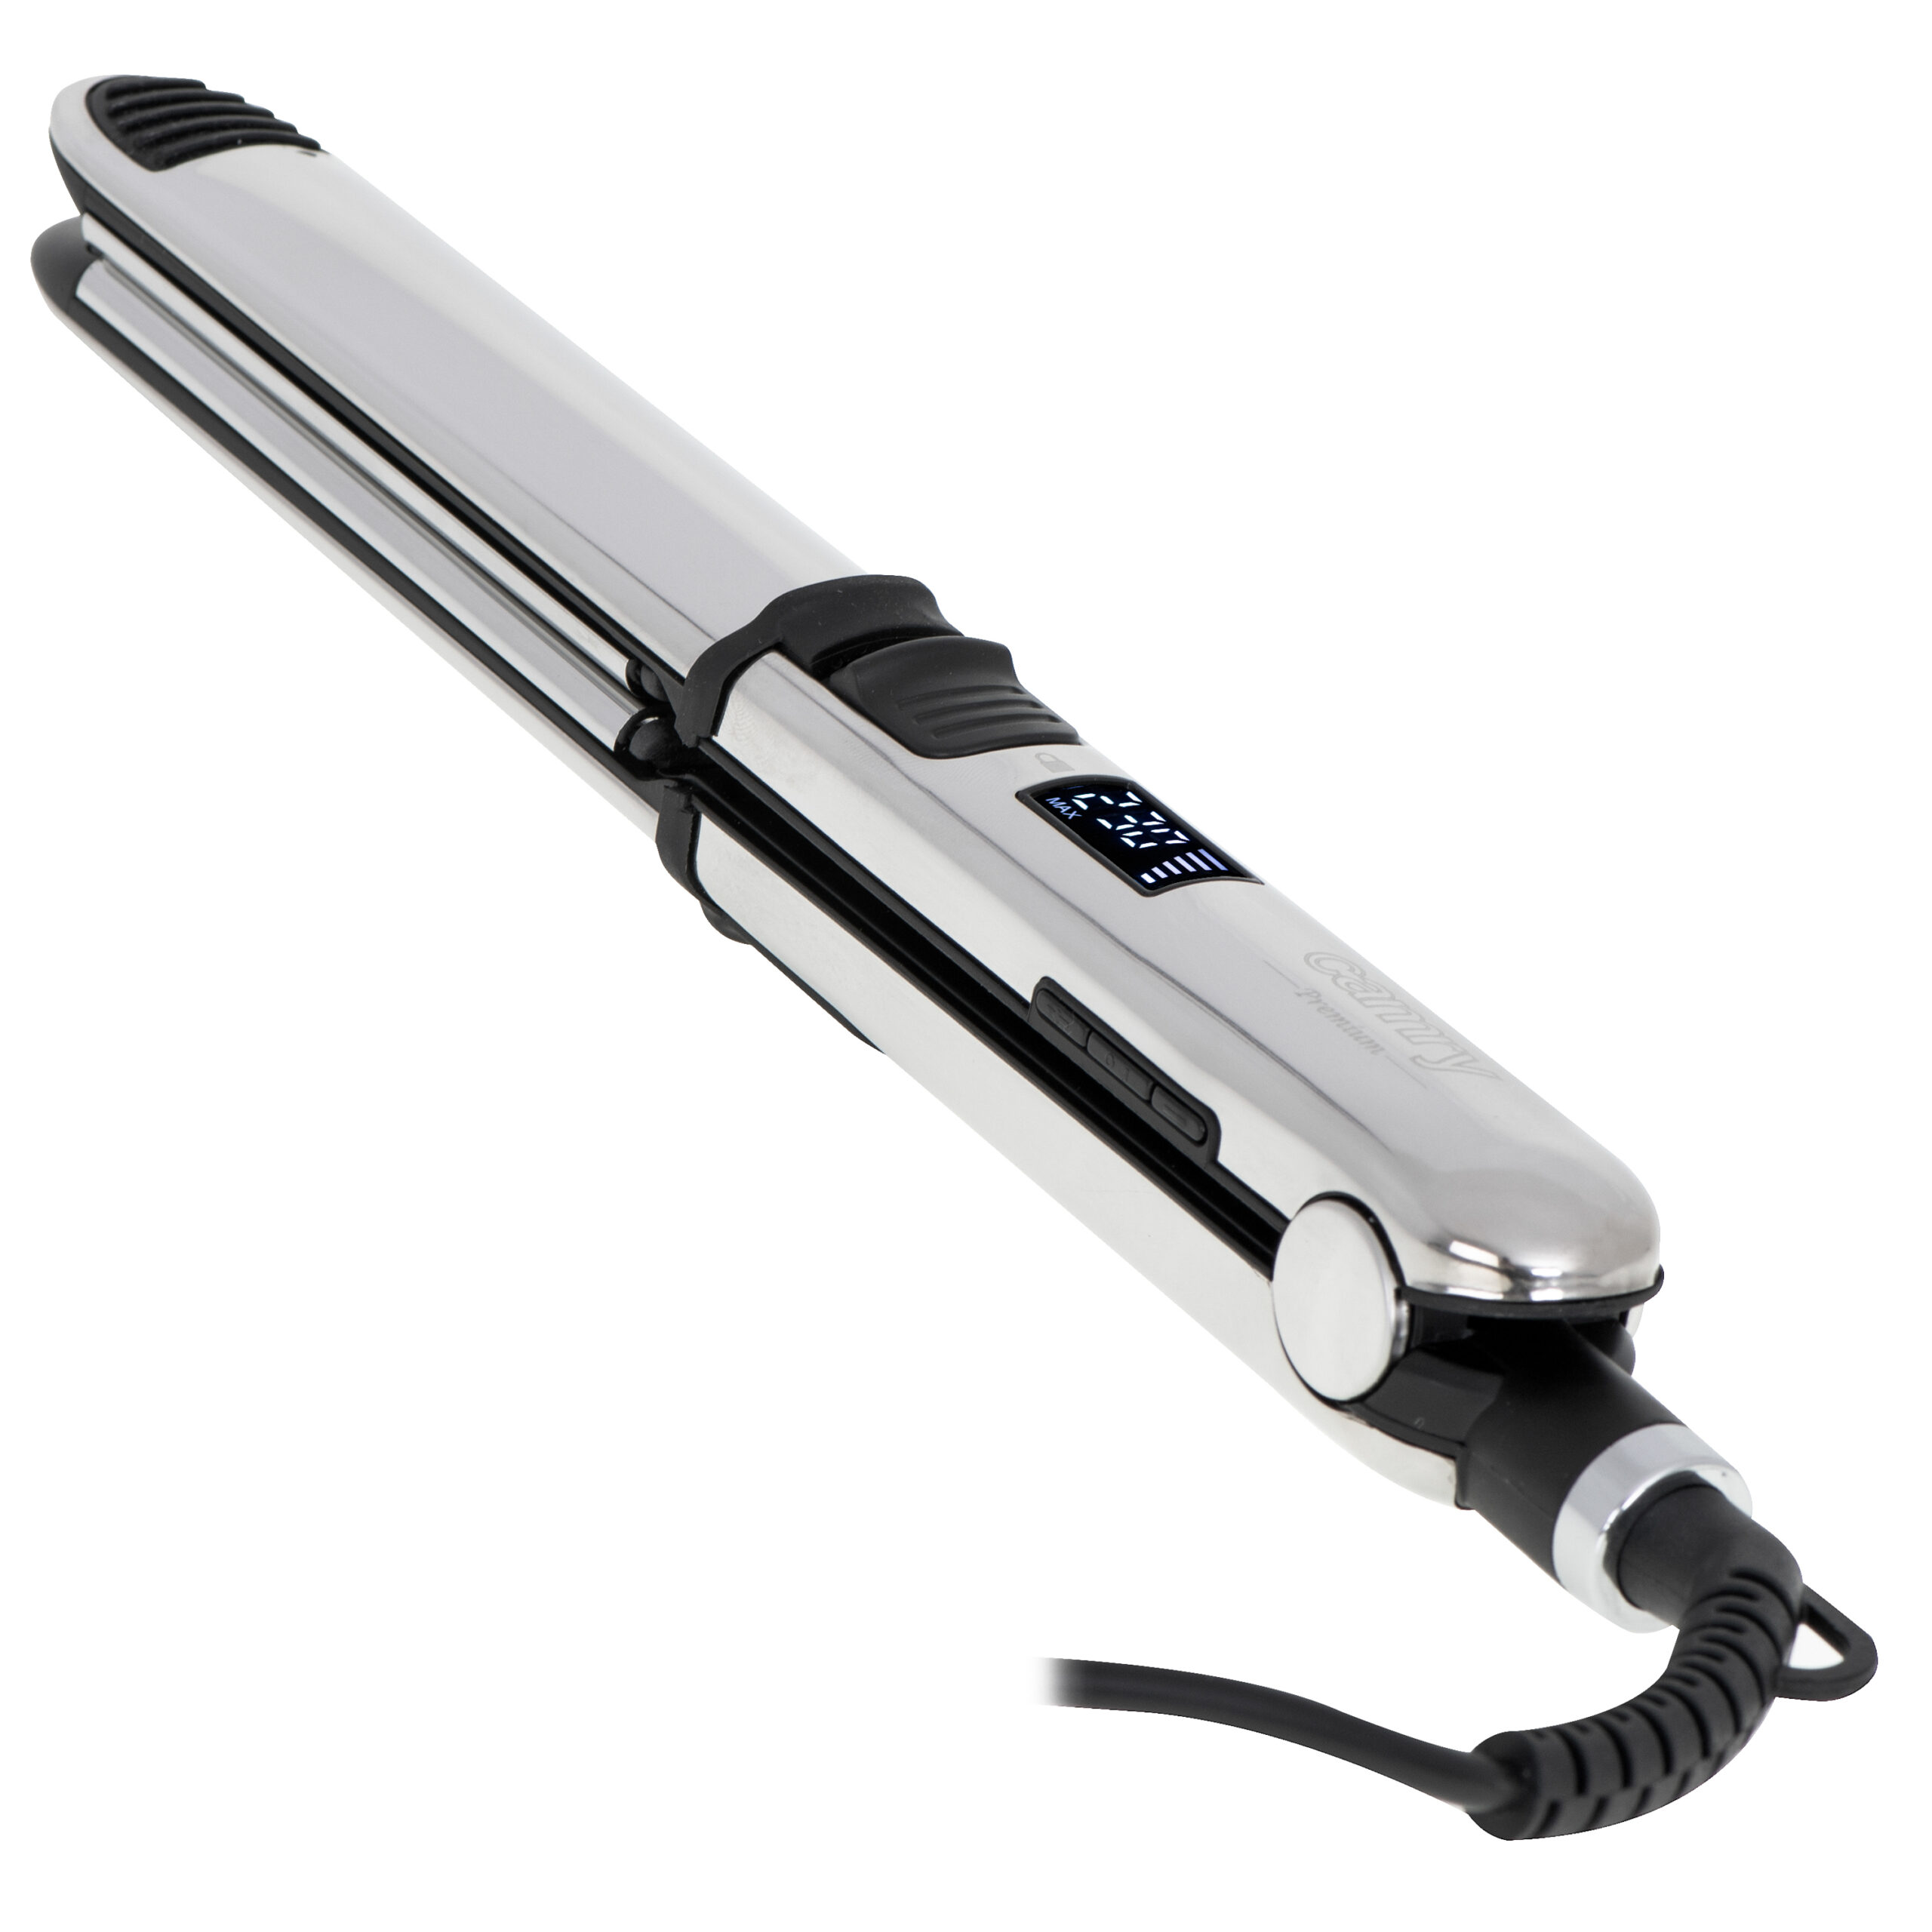 Camry CR 2320 Professional hair straightener – with ION